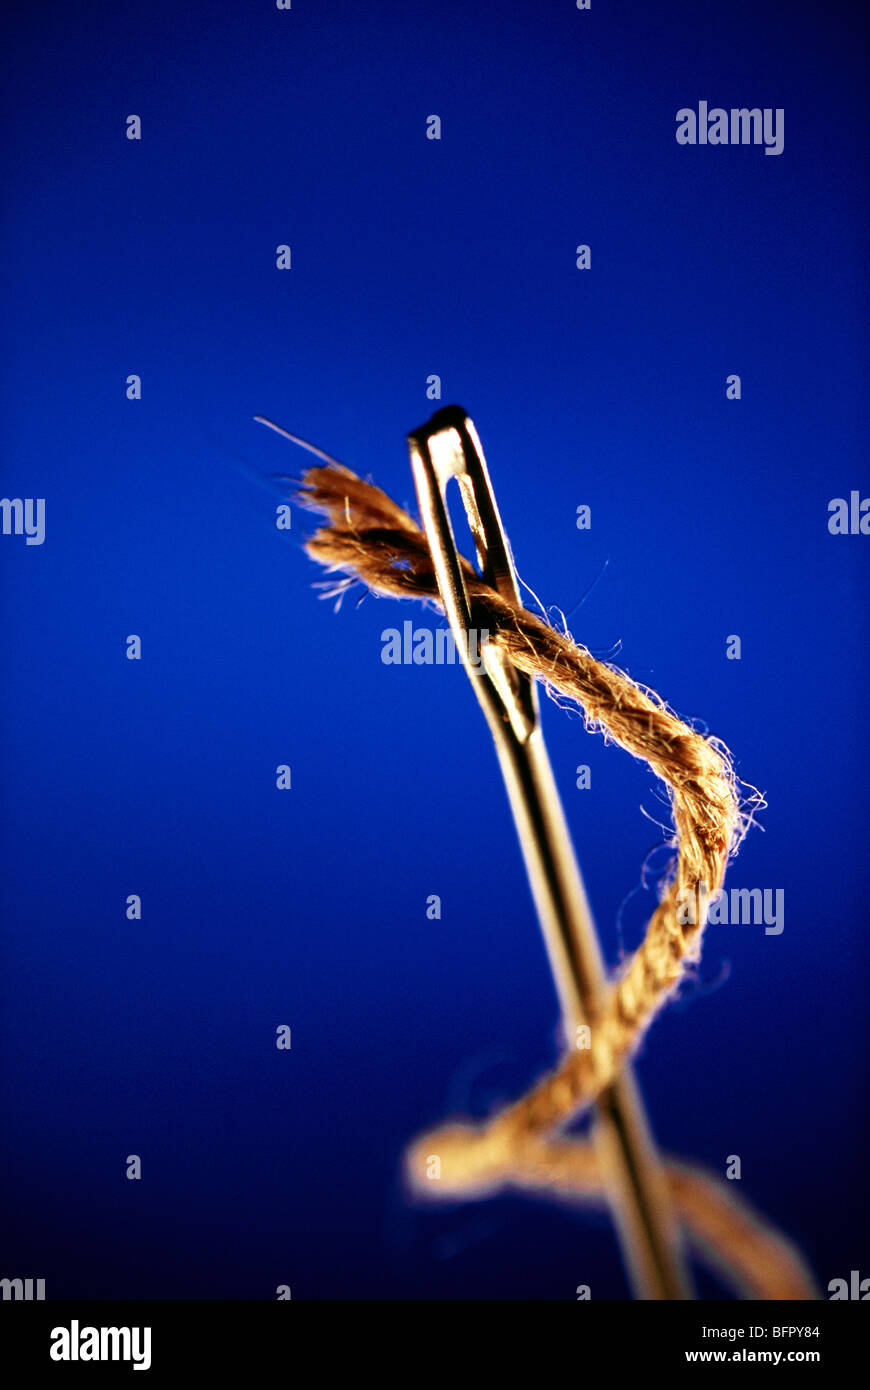 VHM 66703 : Concept ; thread and needle against blue background Stock Photo